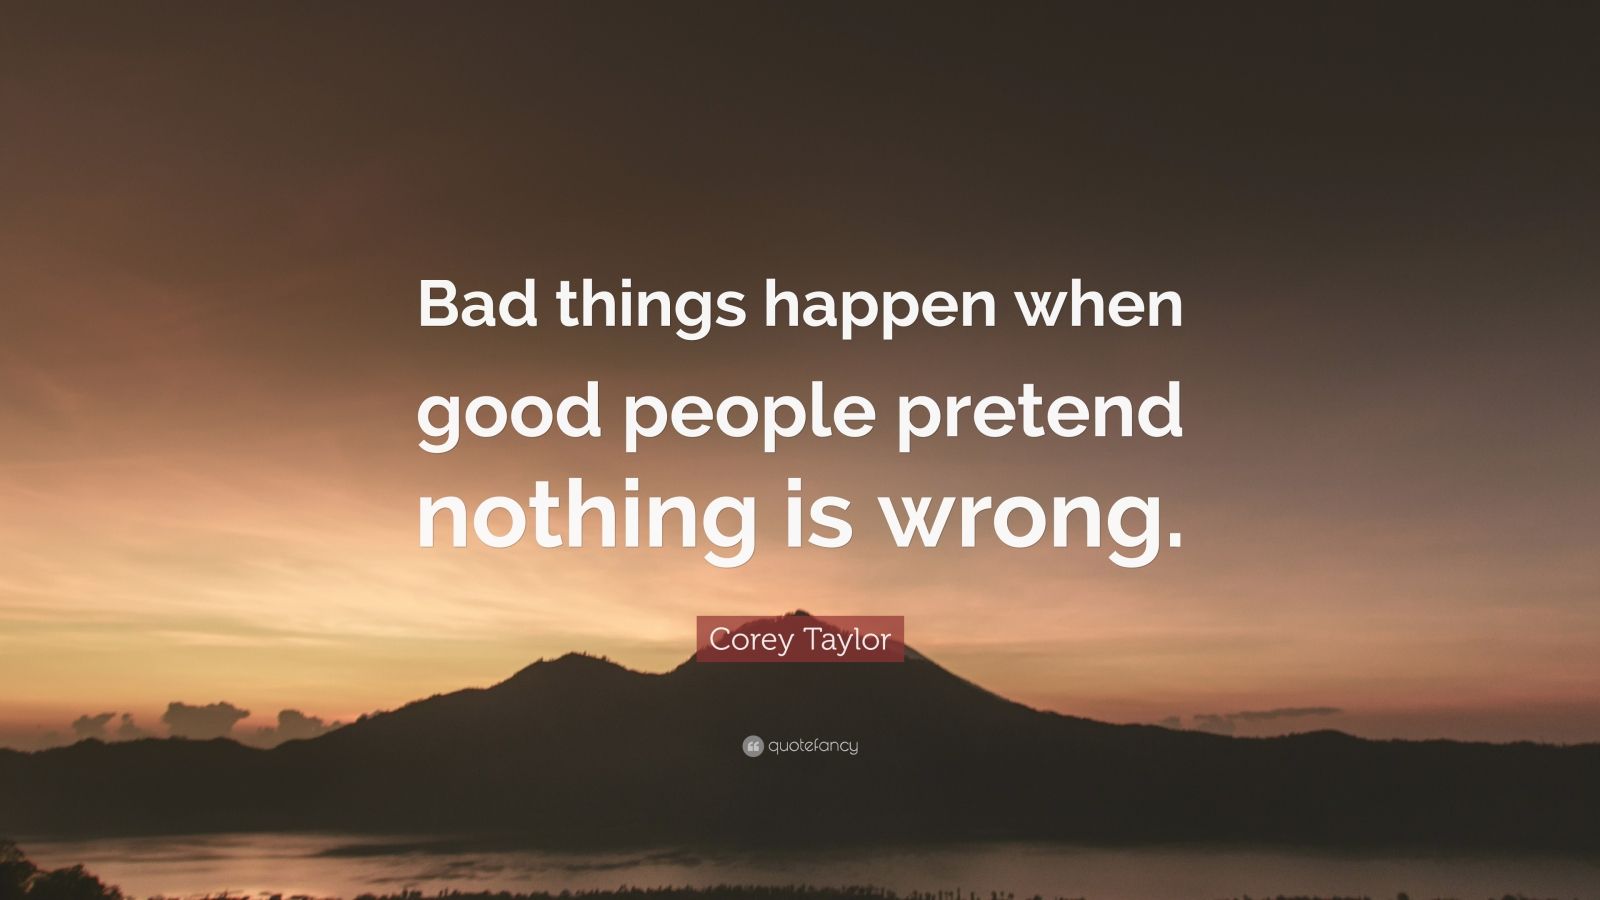 Corey Taylor Quote: “Bad things happen when good people pretend nothing